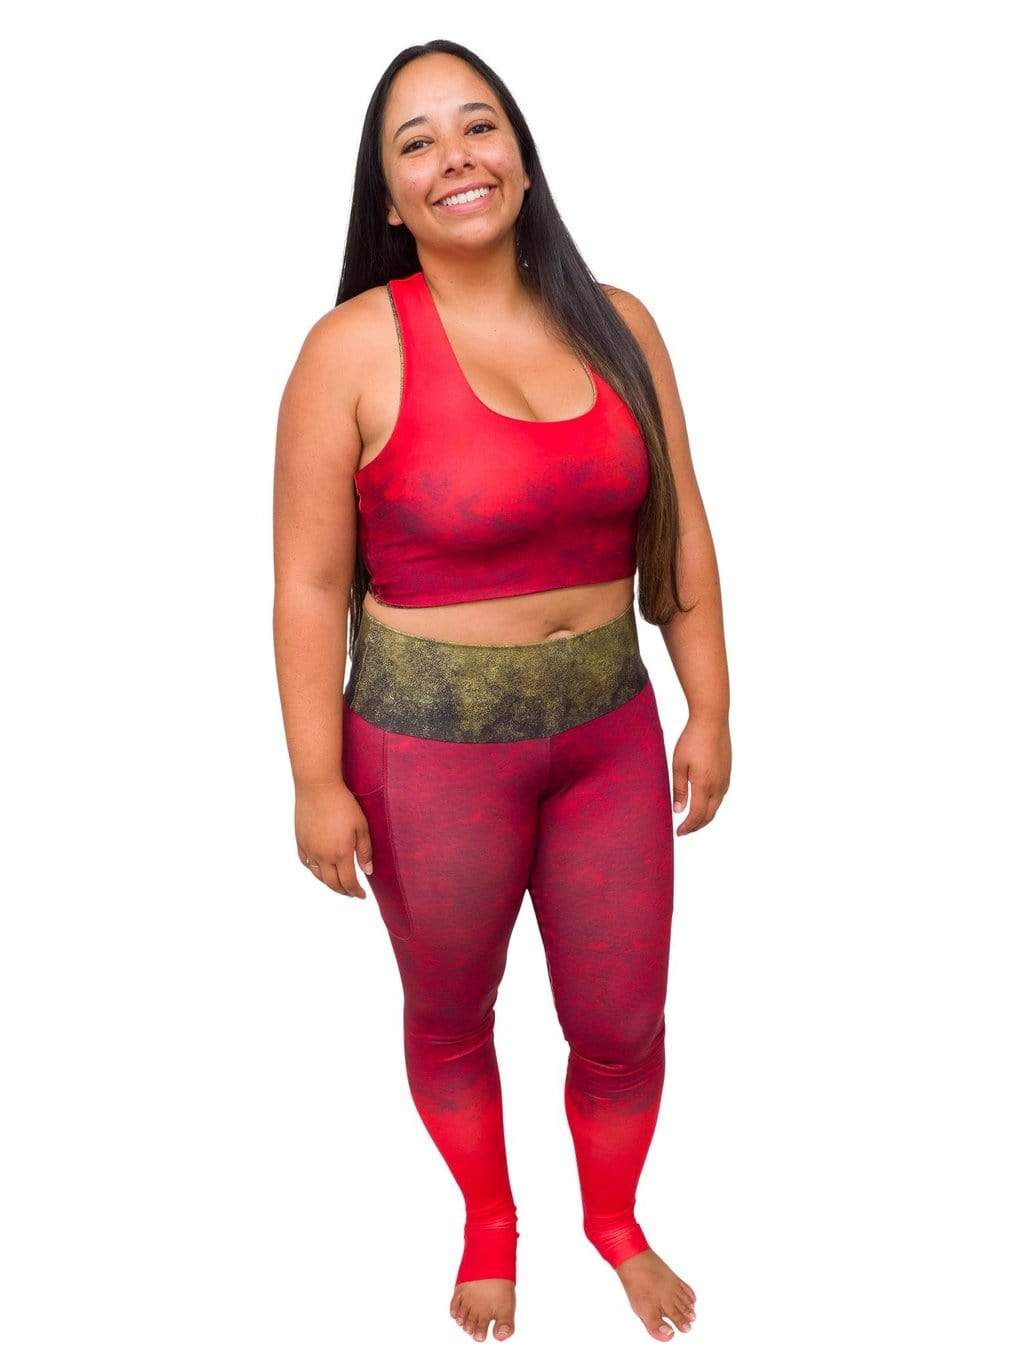 Model: Meagan is a biologist with a focus on water quality who loves to wear her heart on her sleeve while advocating for marine science and conservation. She is 5&#39;3&quot;, 155 lbs, 36DD and is wearing a L top and legging.